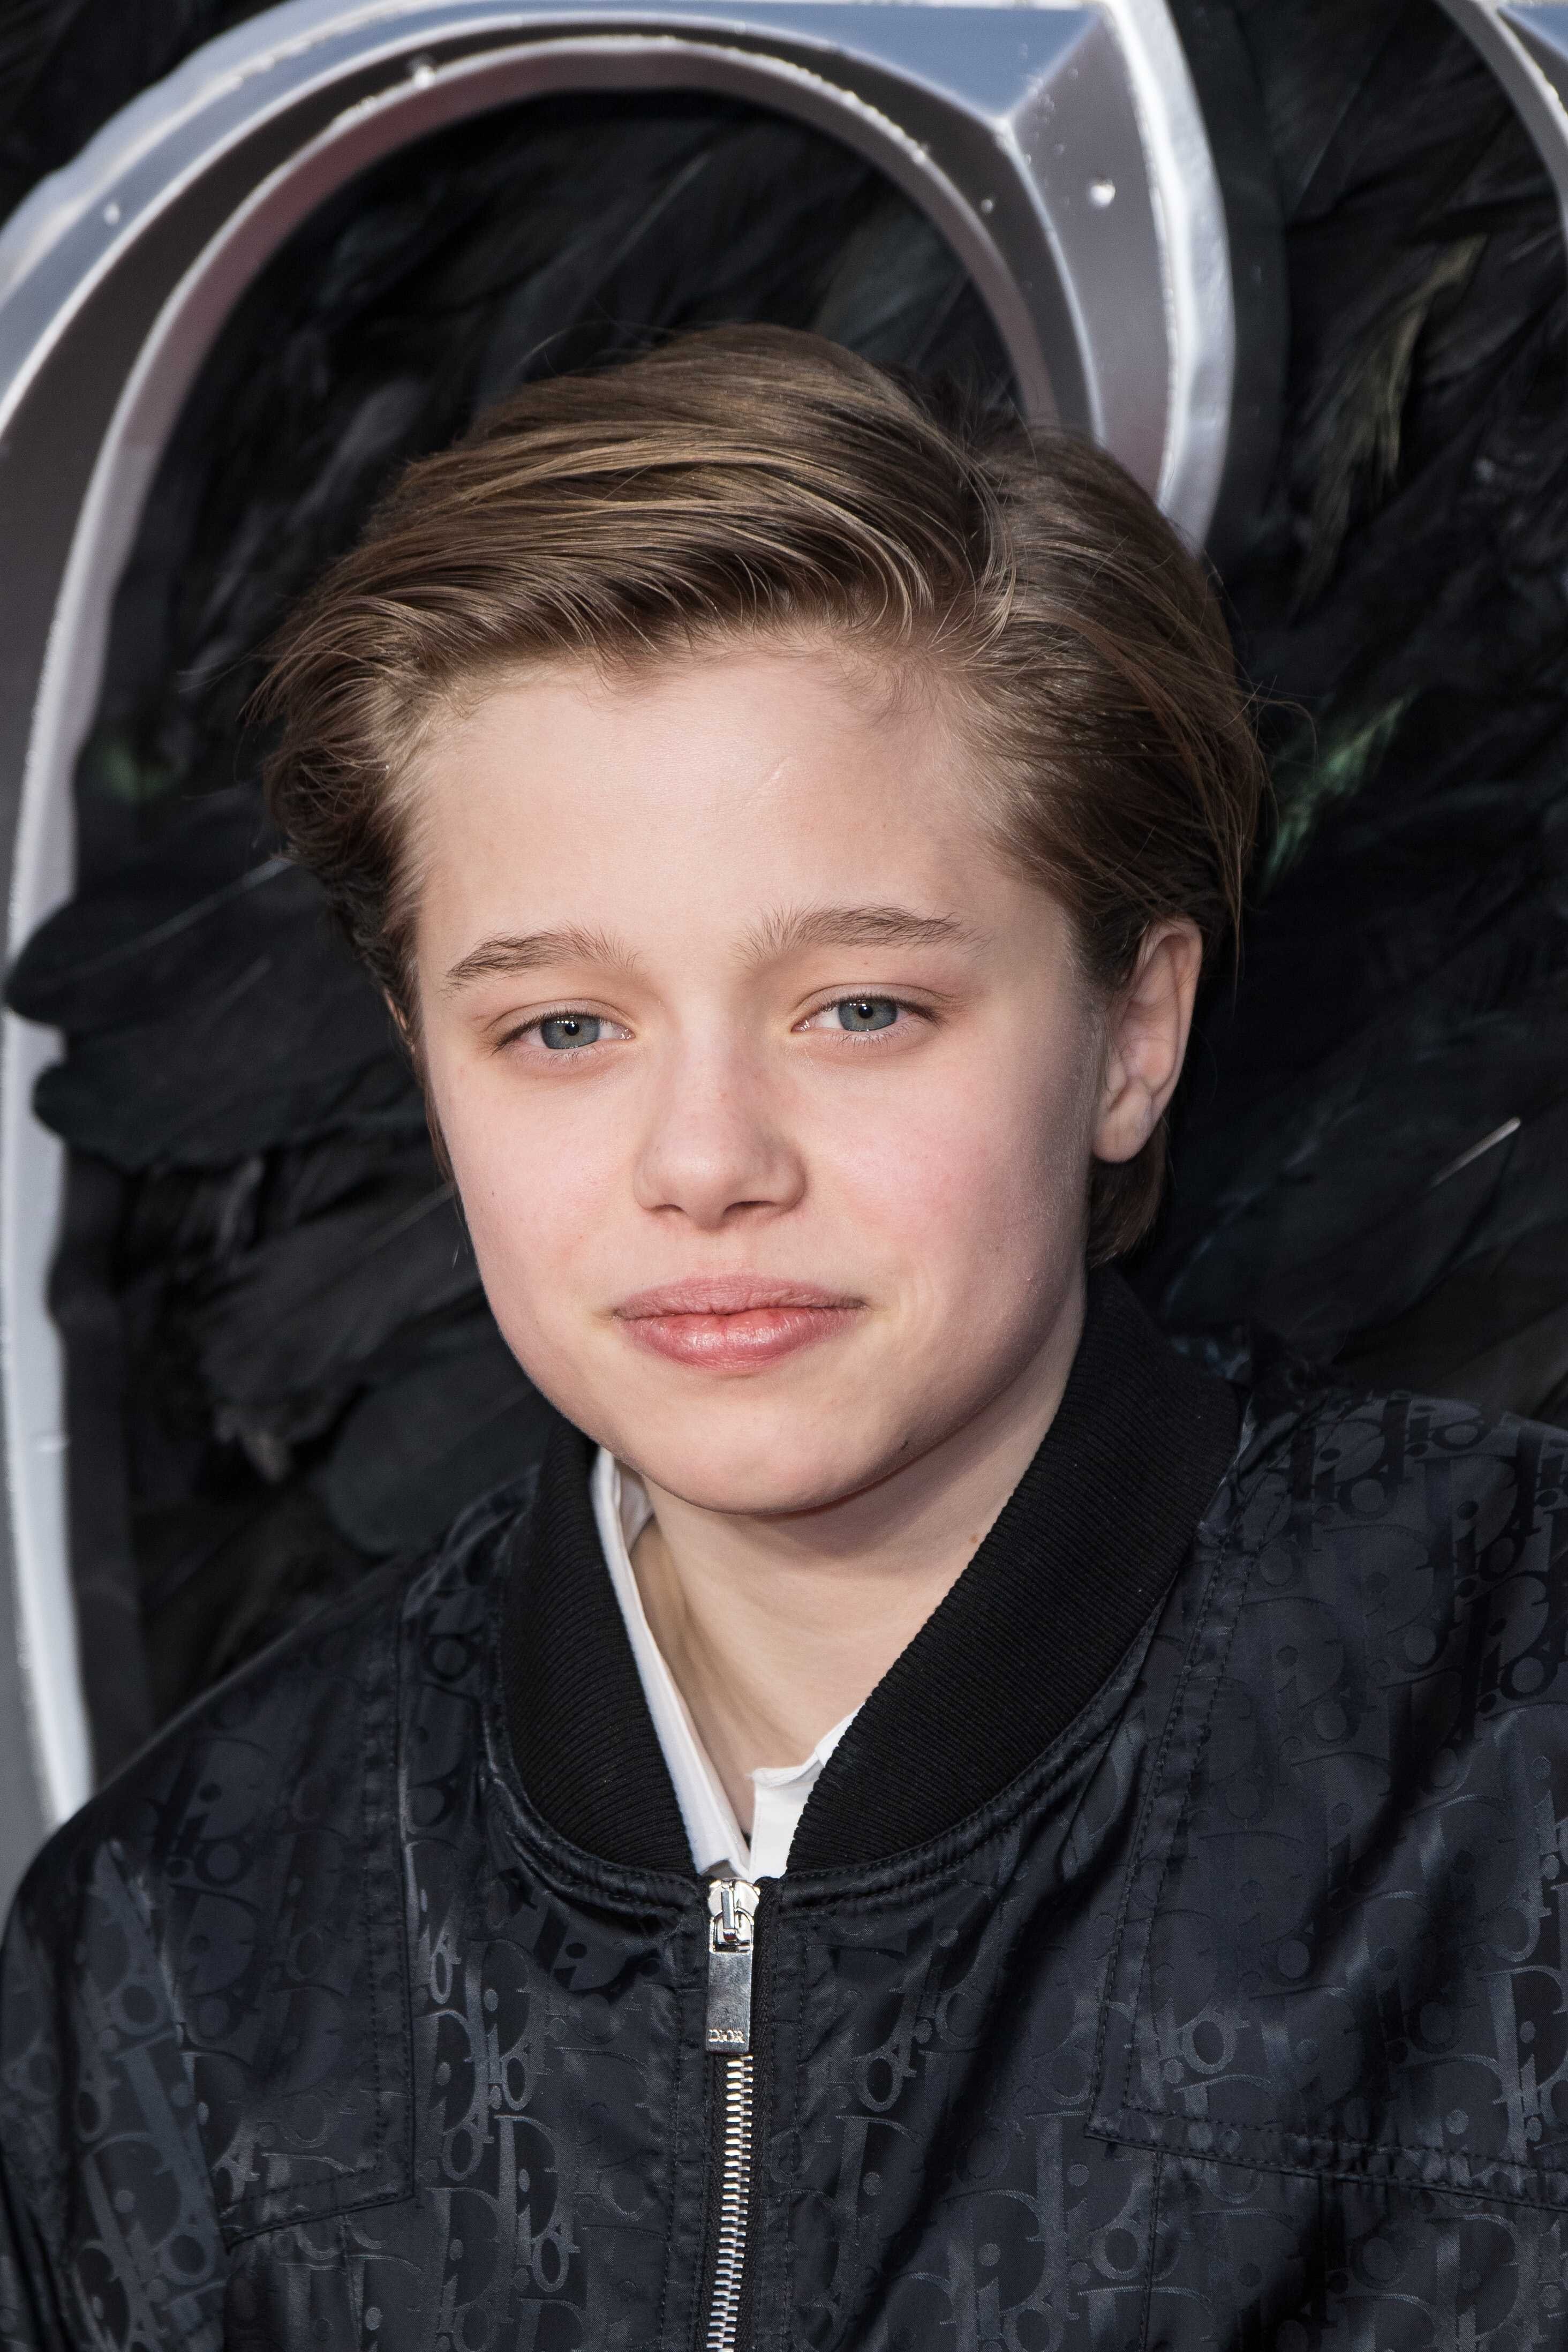 Shiloh Jolie Pitt S 2020 Wrapped Everything We Learned About Brad Pitt And Angelina Jolie S Firstborn Lgbtq Idol Fashion Icon And Inspiration To Millions South China Morning Post